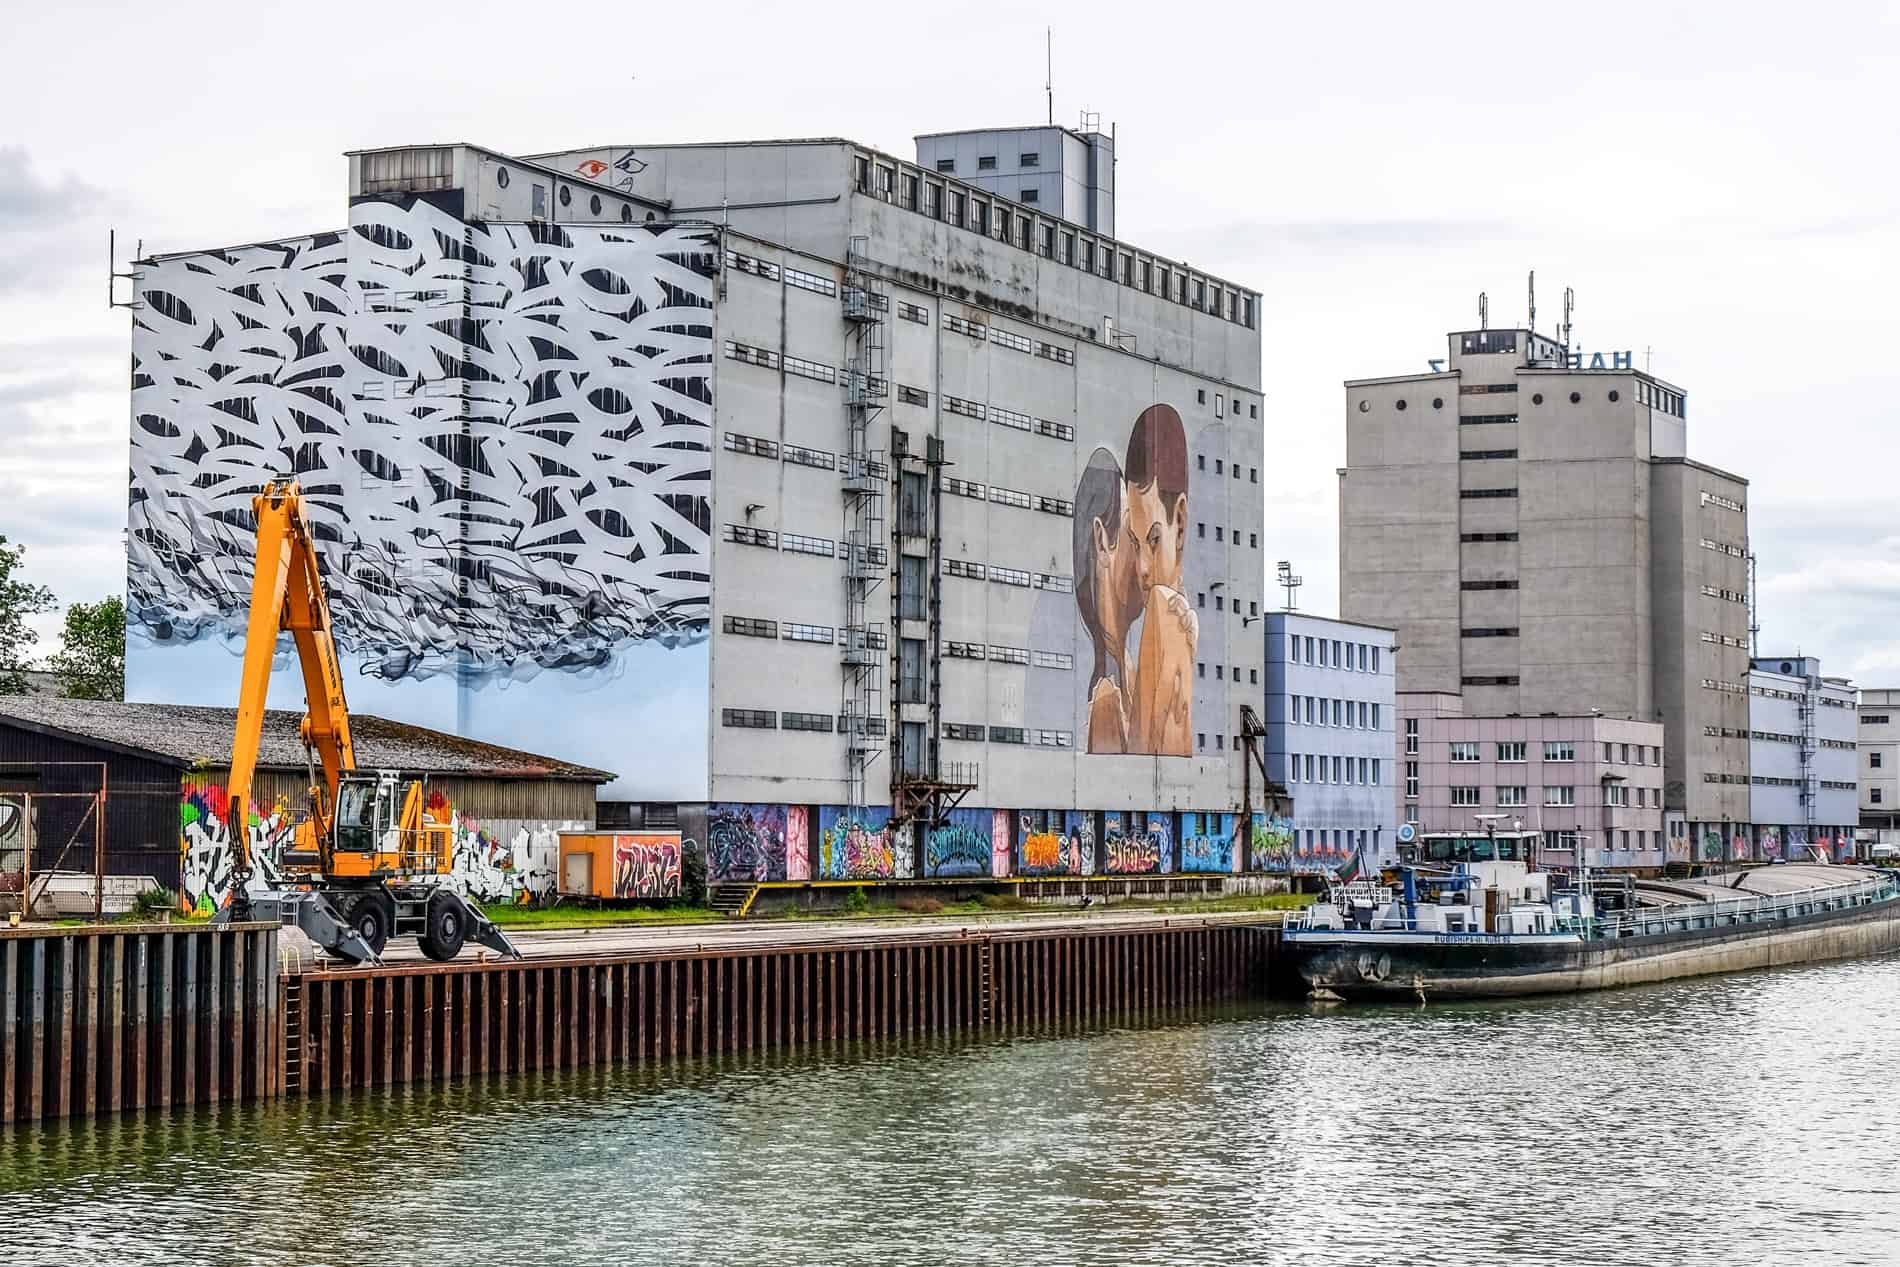 A painting on a building at the commerical port in Linz - one of many giving the area the name, Mural Harbour.